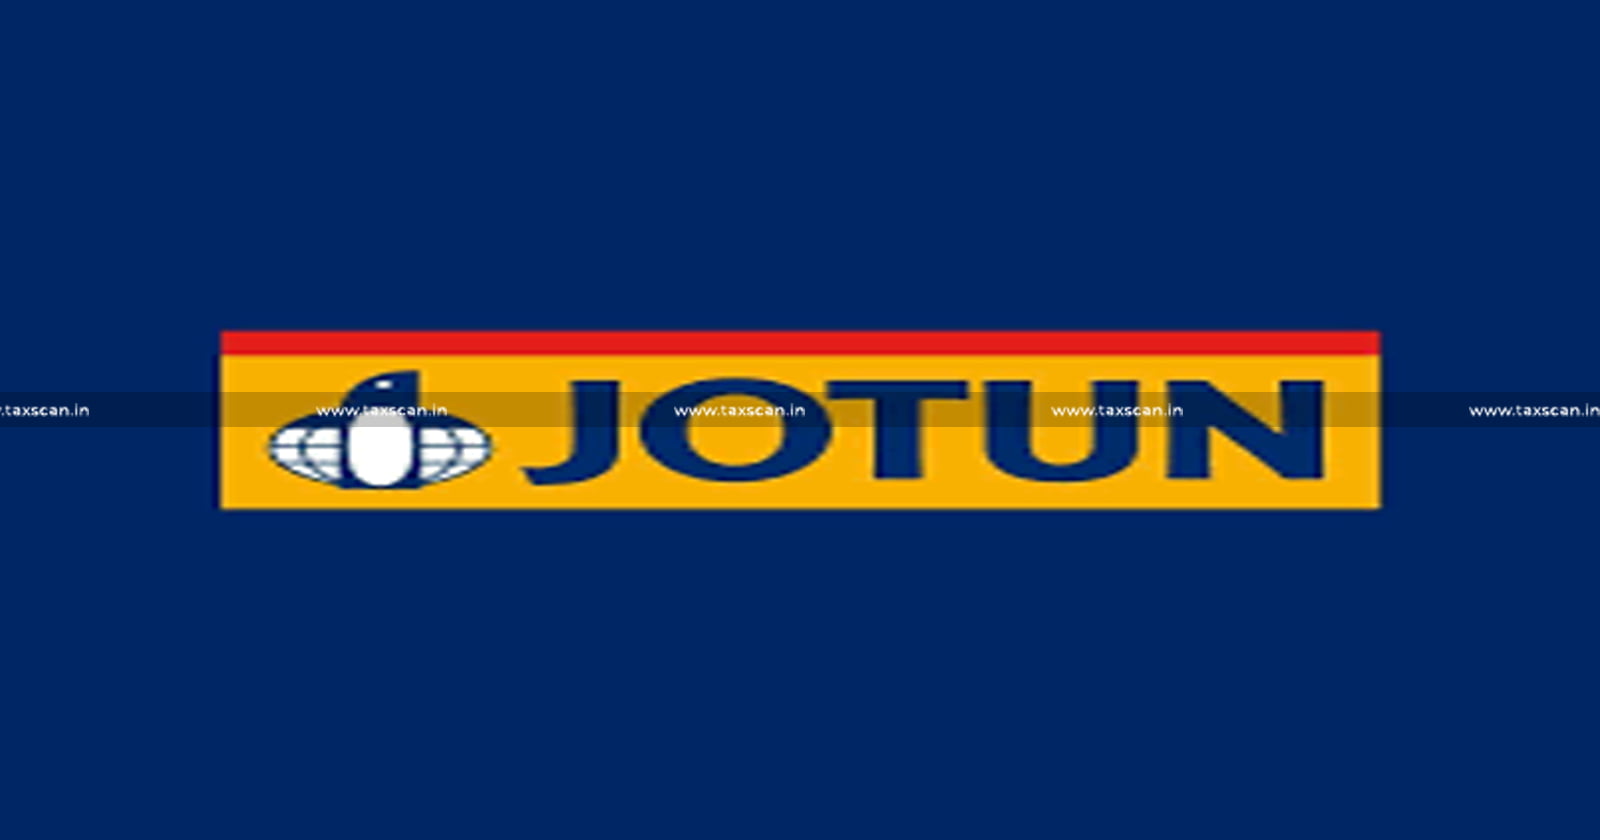 Jotun India - Advance Ruling - Writ Petition - Bombay High Court - GST Rate - Marine Paint - taxscan